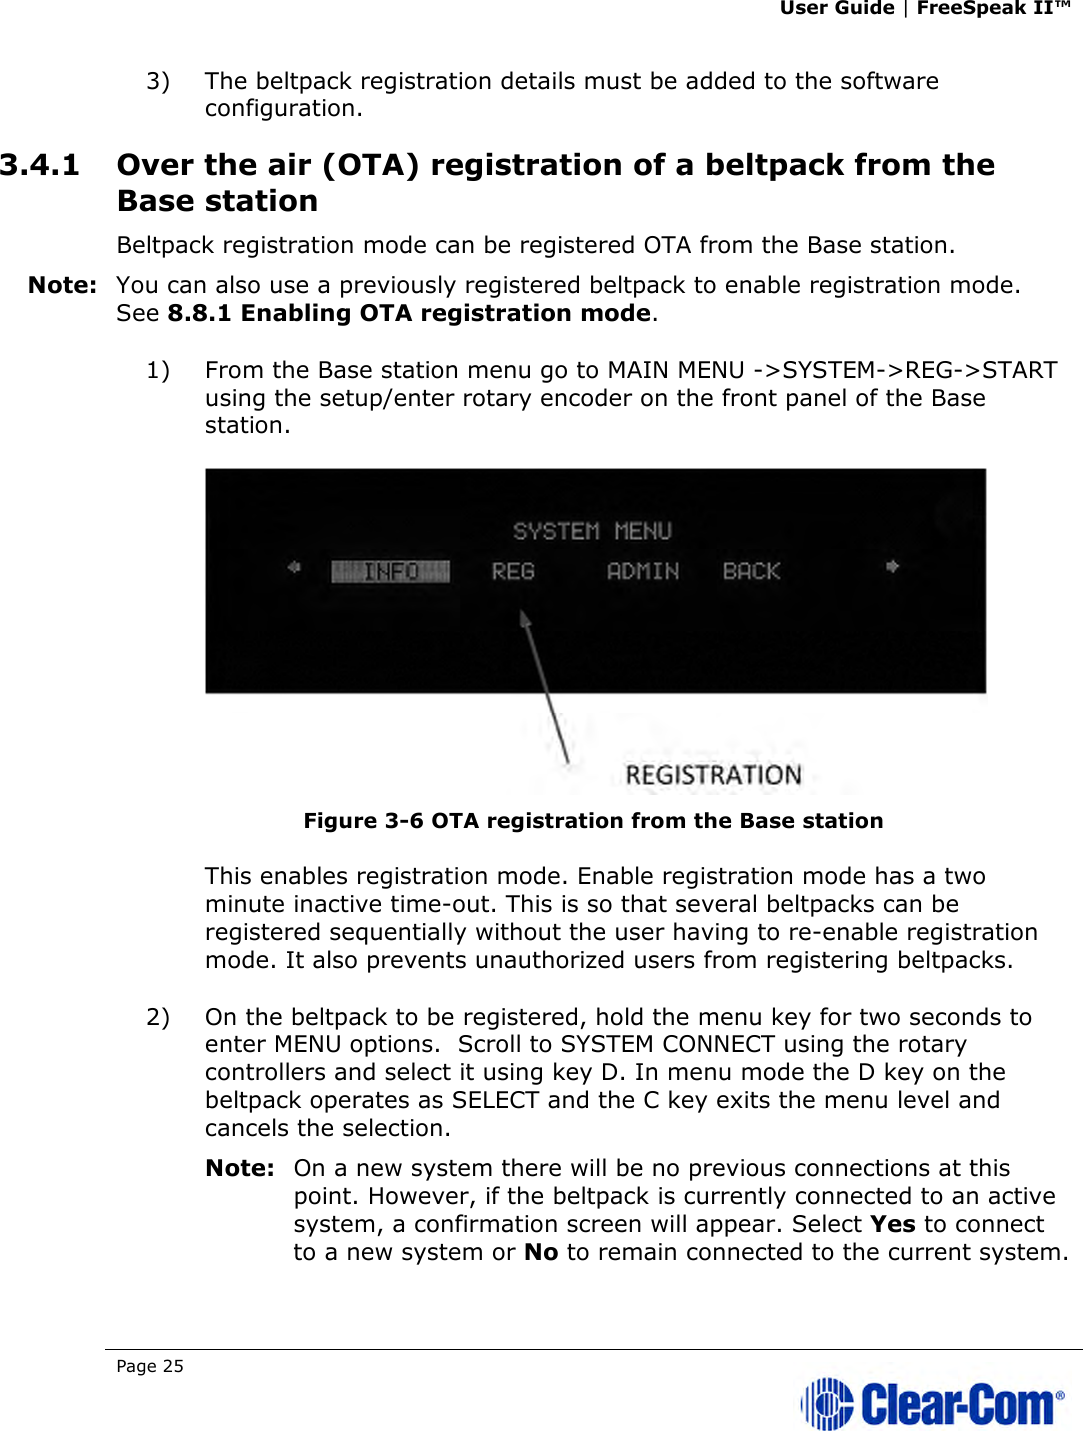 User Guide | FreeSpeak II™  Page 25   3) The beltpack registration details must be added to the software configuration.  3.4.1 Over the air (OTA) registration of a beltpack from the Base station Beltpack registration mode can be registered OTA from the Base station. Note: You can also use a previously registered beltpack to enable registration mode. See 8.8.1 Enabling OTA registration mode. 1) From the Base station menu go to MAIN MENU -&gt;SYSTEM-&gt;REG-&gt;START using the setup/enter rotary encoder on the front panel of the Base station.  Figure 3-6 OTA registration from the Base station This enables registration mode. Enable registration mode has a two minute inactive time-out. This is so that several beltpacks can be registered sequentially without the user having to re-enable registration mode. It also prevents unauthorized users from registering beltpacks. 2) On the beltpack to be registered, hold the menu key for two seconds to enter MENU options.  Scroll to SYSTEM CONNECT using the rotary controllers and select it using key D. In menu mode the D key on the beltpack operates as SELECT and the C key exits the menu level and cancels the selection.  Note: On a new system there will be no previous connections at this point. However, if the beltpack is currently connected to an active system, a confirmation screen will appear. Select Yes to connect to a new system or No to remain connected to the current system. 